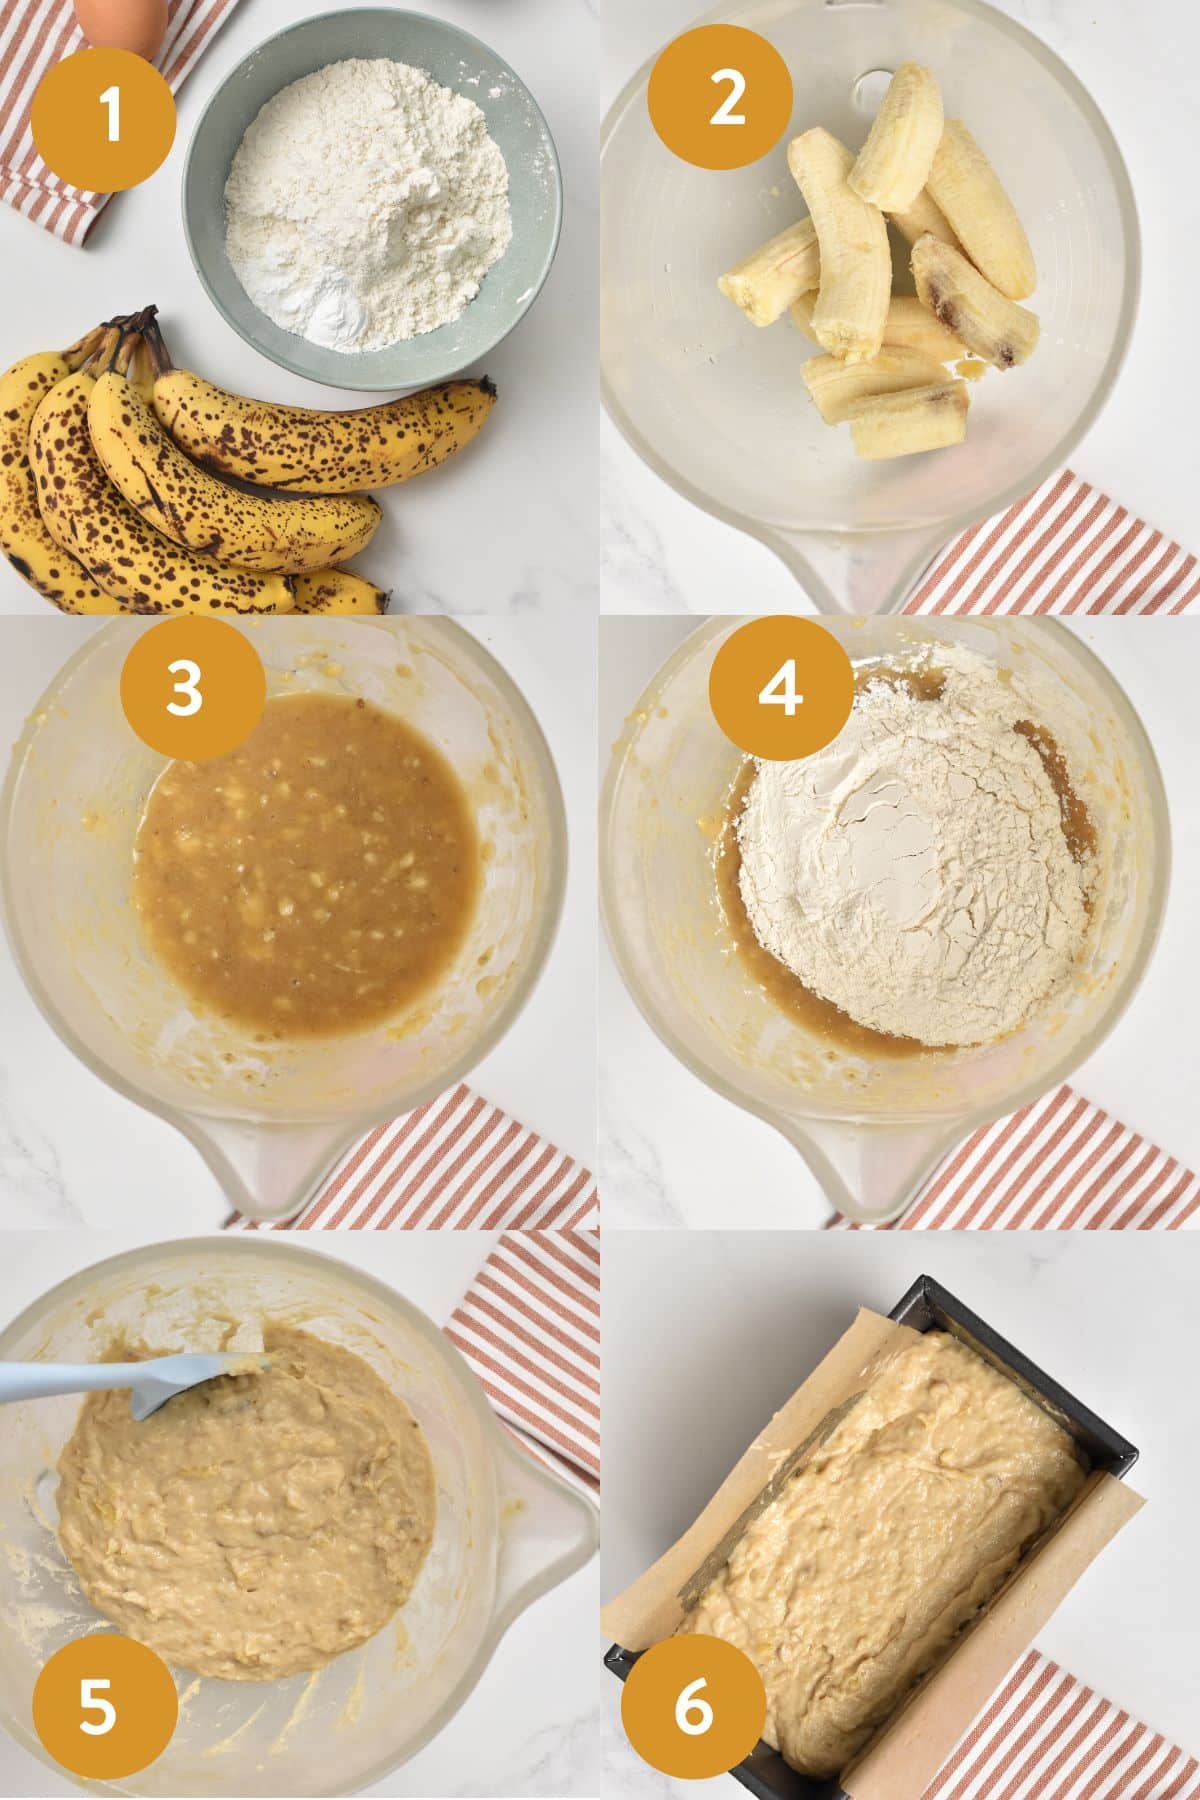 How to make 4 ingredient Banana BreadHow to make 4 ingredient Banana Bread